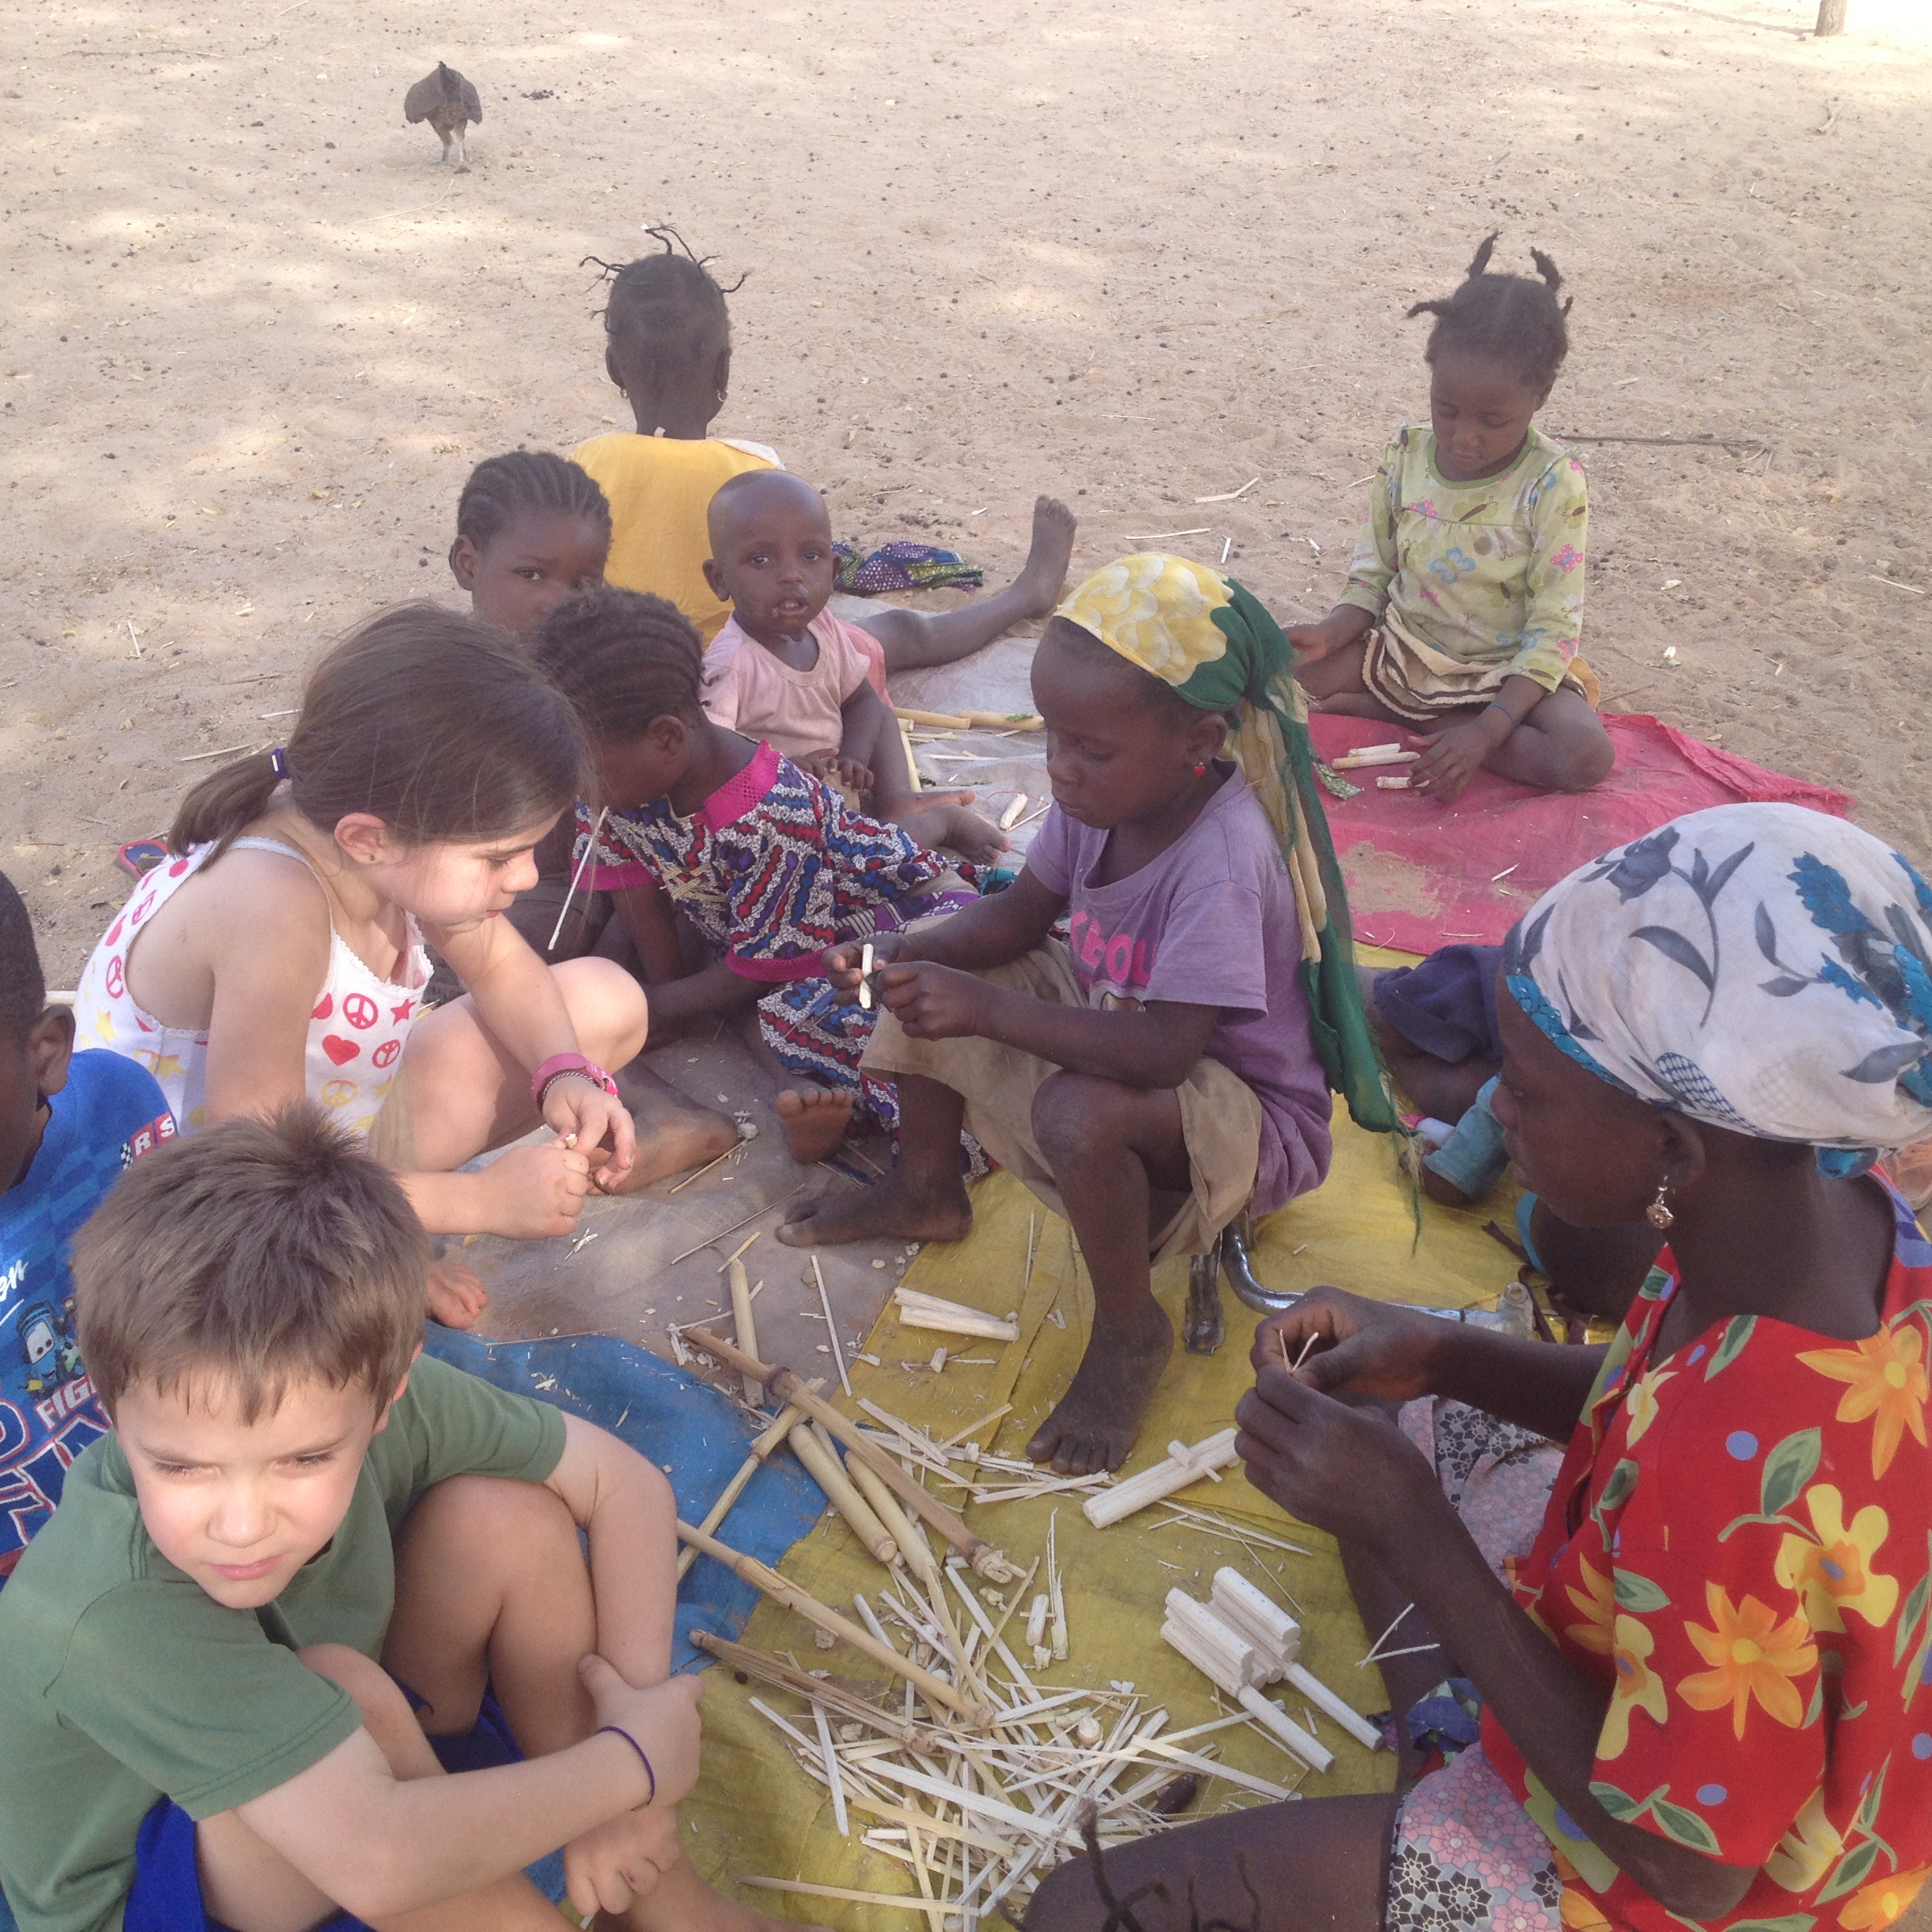 Children at the Bible school building wagons and dolls out of millet stalks